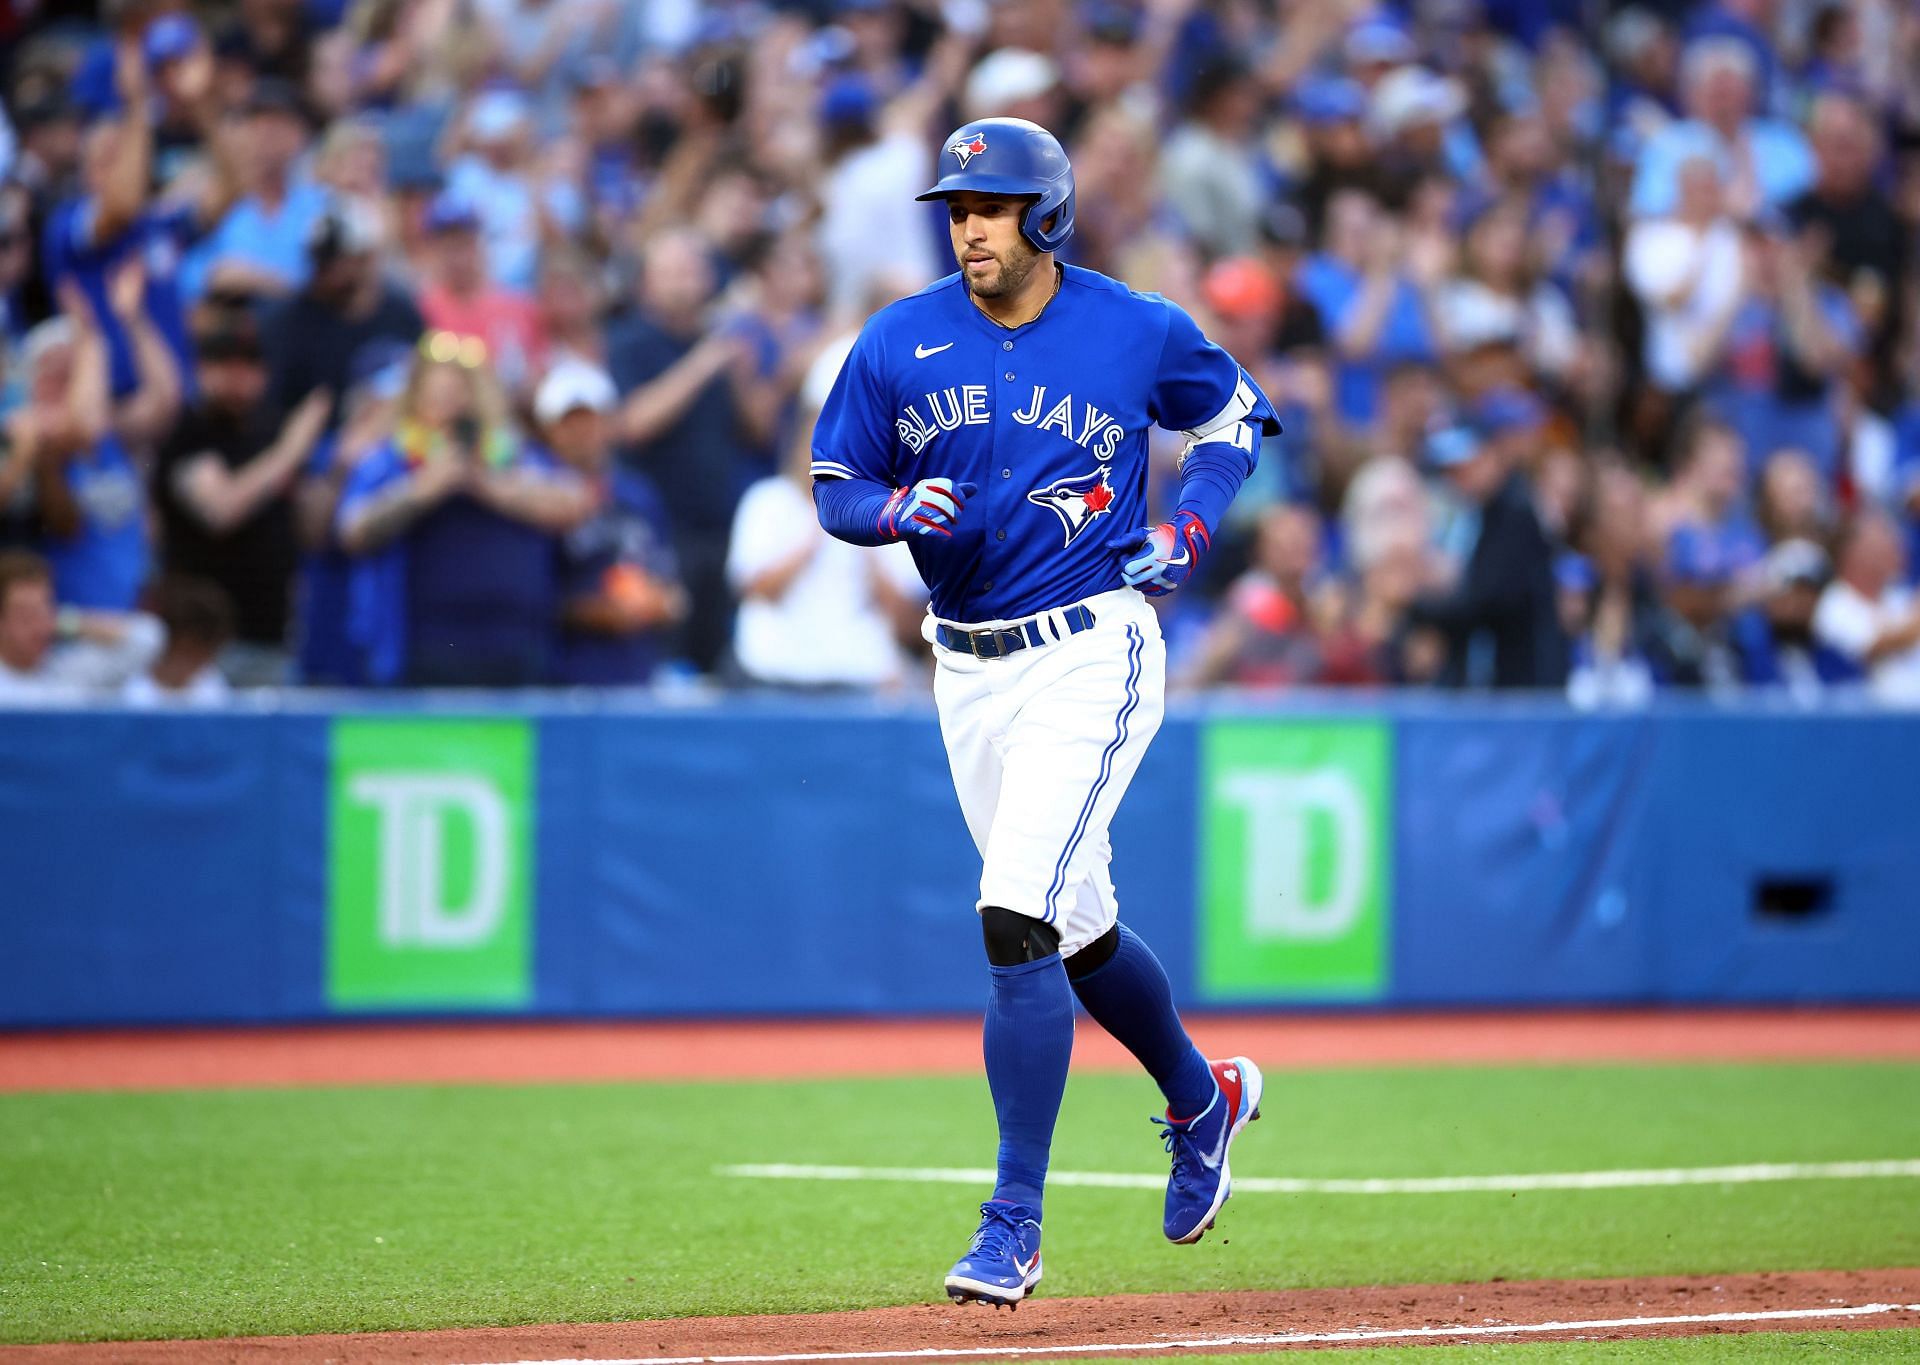 George Springer trots the bases during a Boston Red Sox at Toronto Blue Jays game.